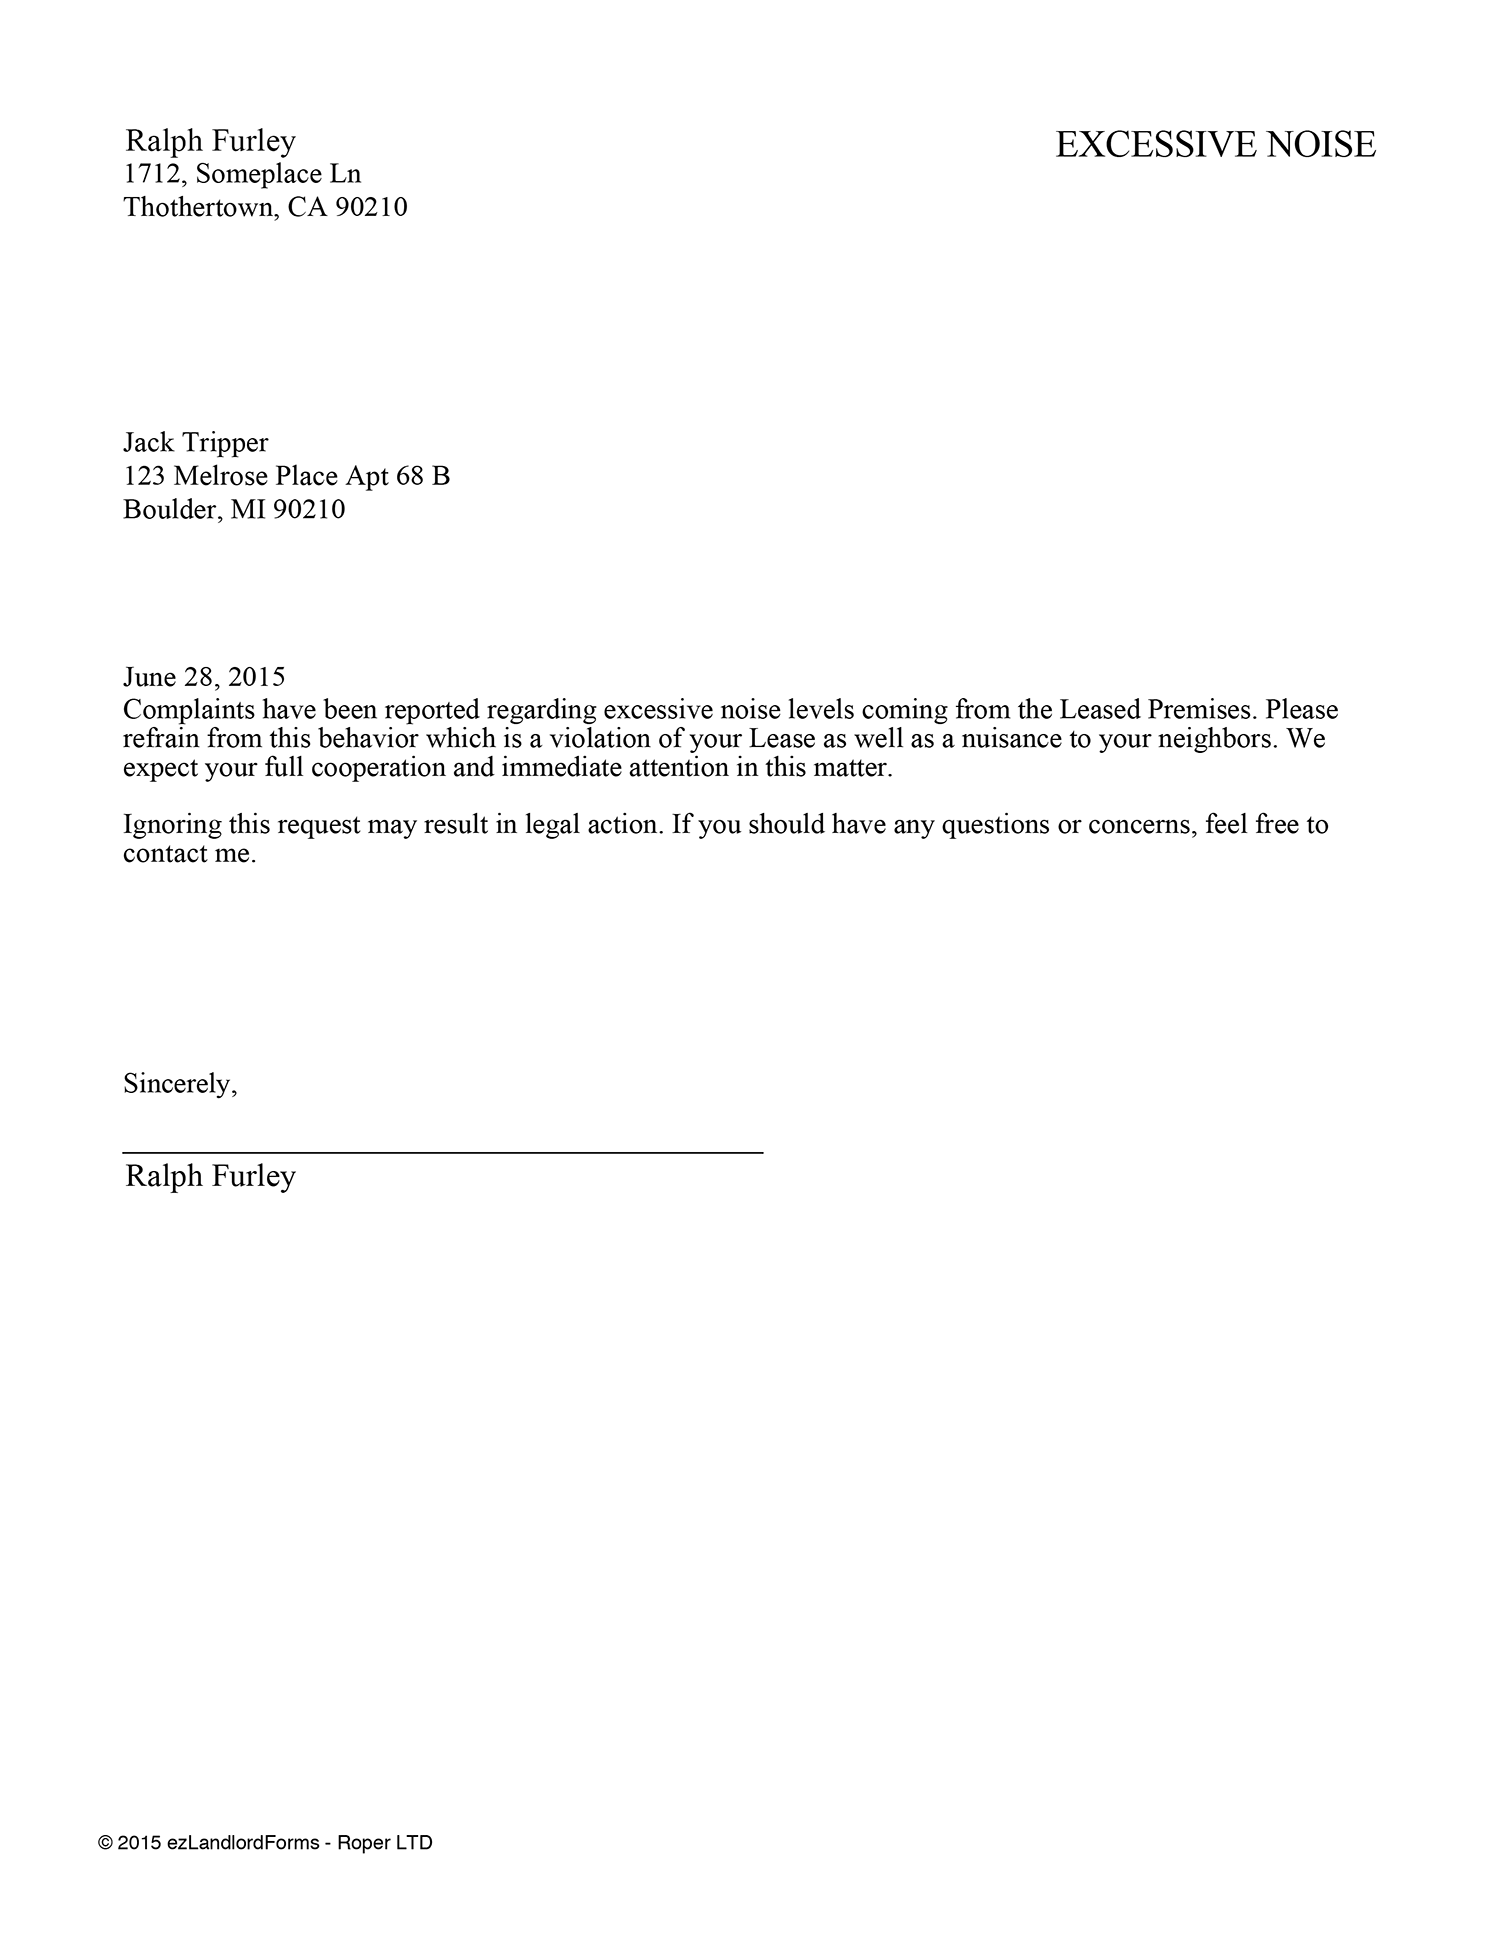 Warning Letter To Tenant For Violations from www.ezlandlordforms.com